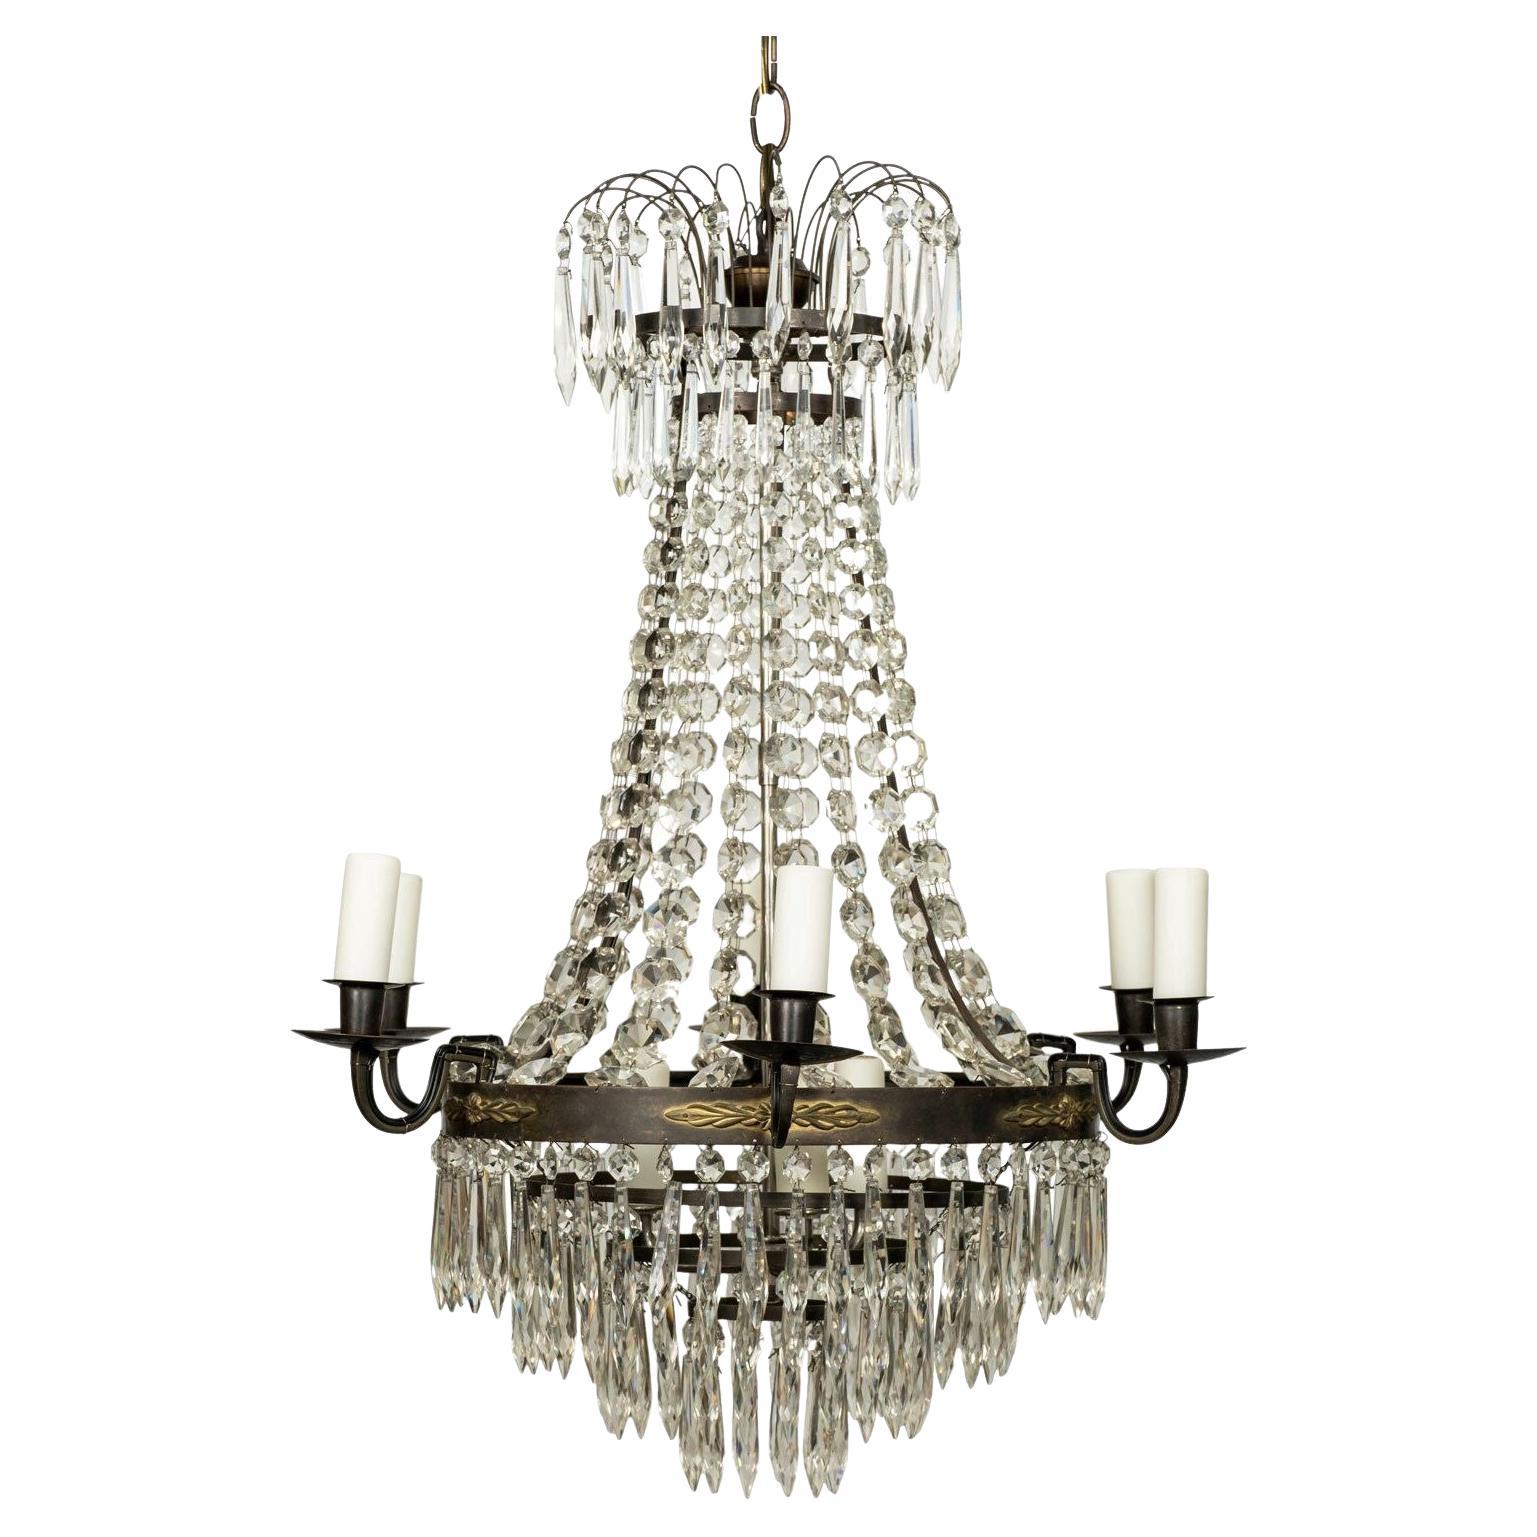 Neoclassical Swedish Gilt-Brass and Crystal Chandelier